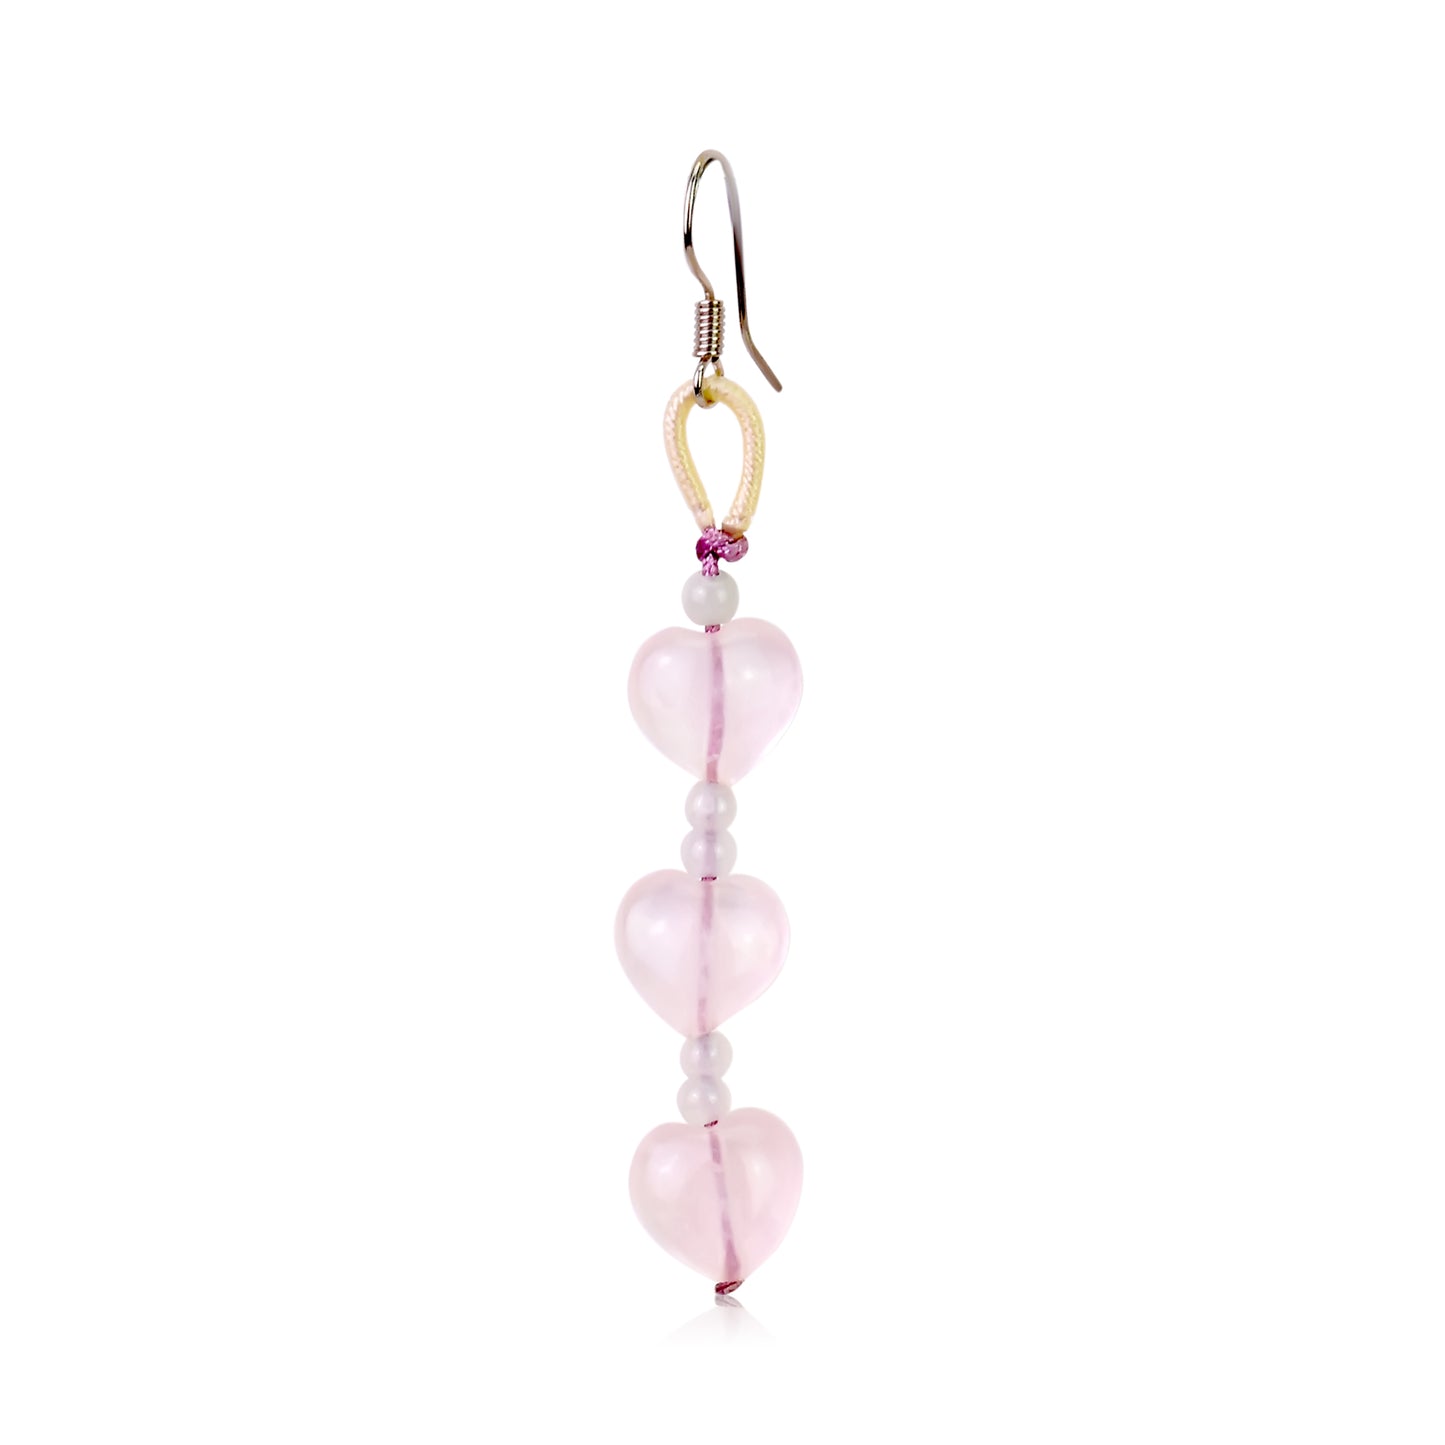 Accessorize with Style & Elegance with Triple Rose Quartz Heart Earrings made with Lavender Cord